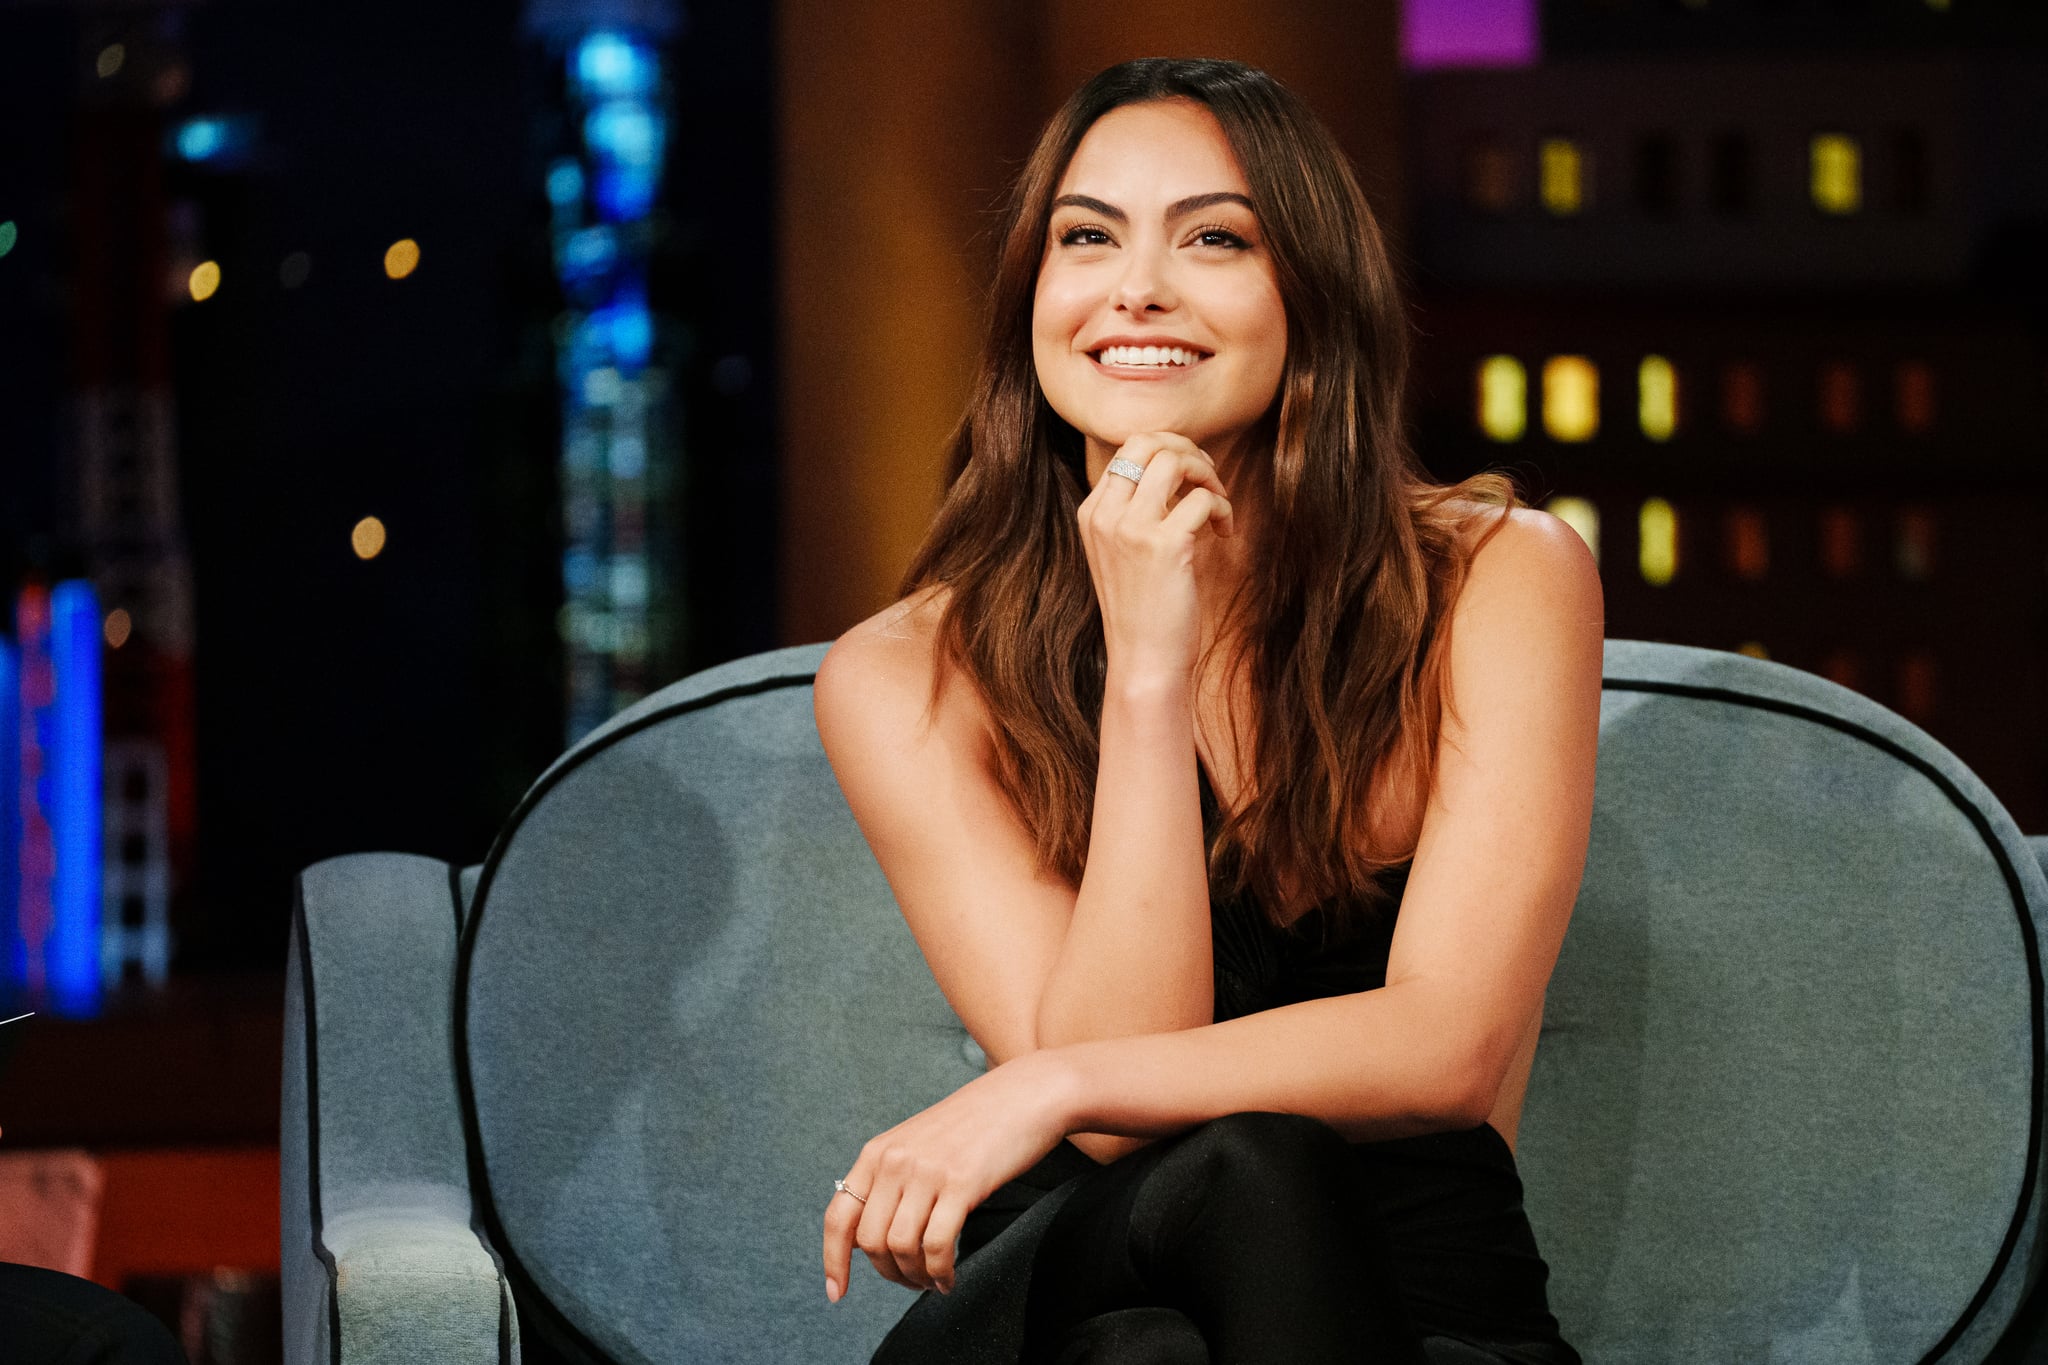 LOS ANGELES - SEPTEMBER 12: The Late Late Show Starring James Corden will air Monday, September 12, 2022 with guests Camila Mendes, Bradley Whitford and Tai Verdes.  (Photo by Terence Patrick/CBS via Getty Images)